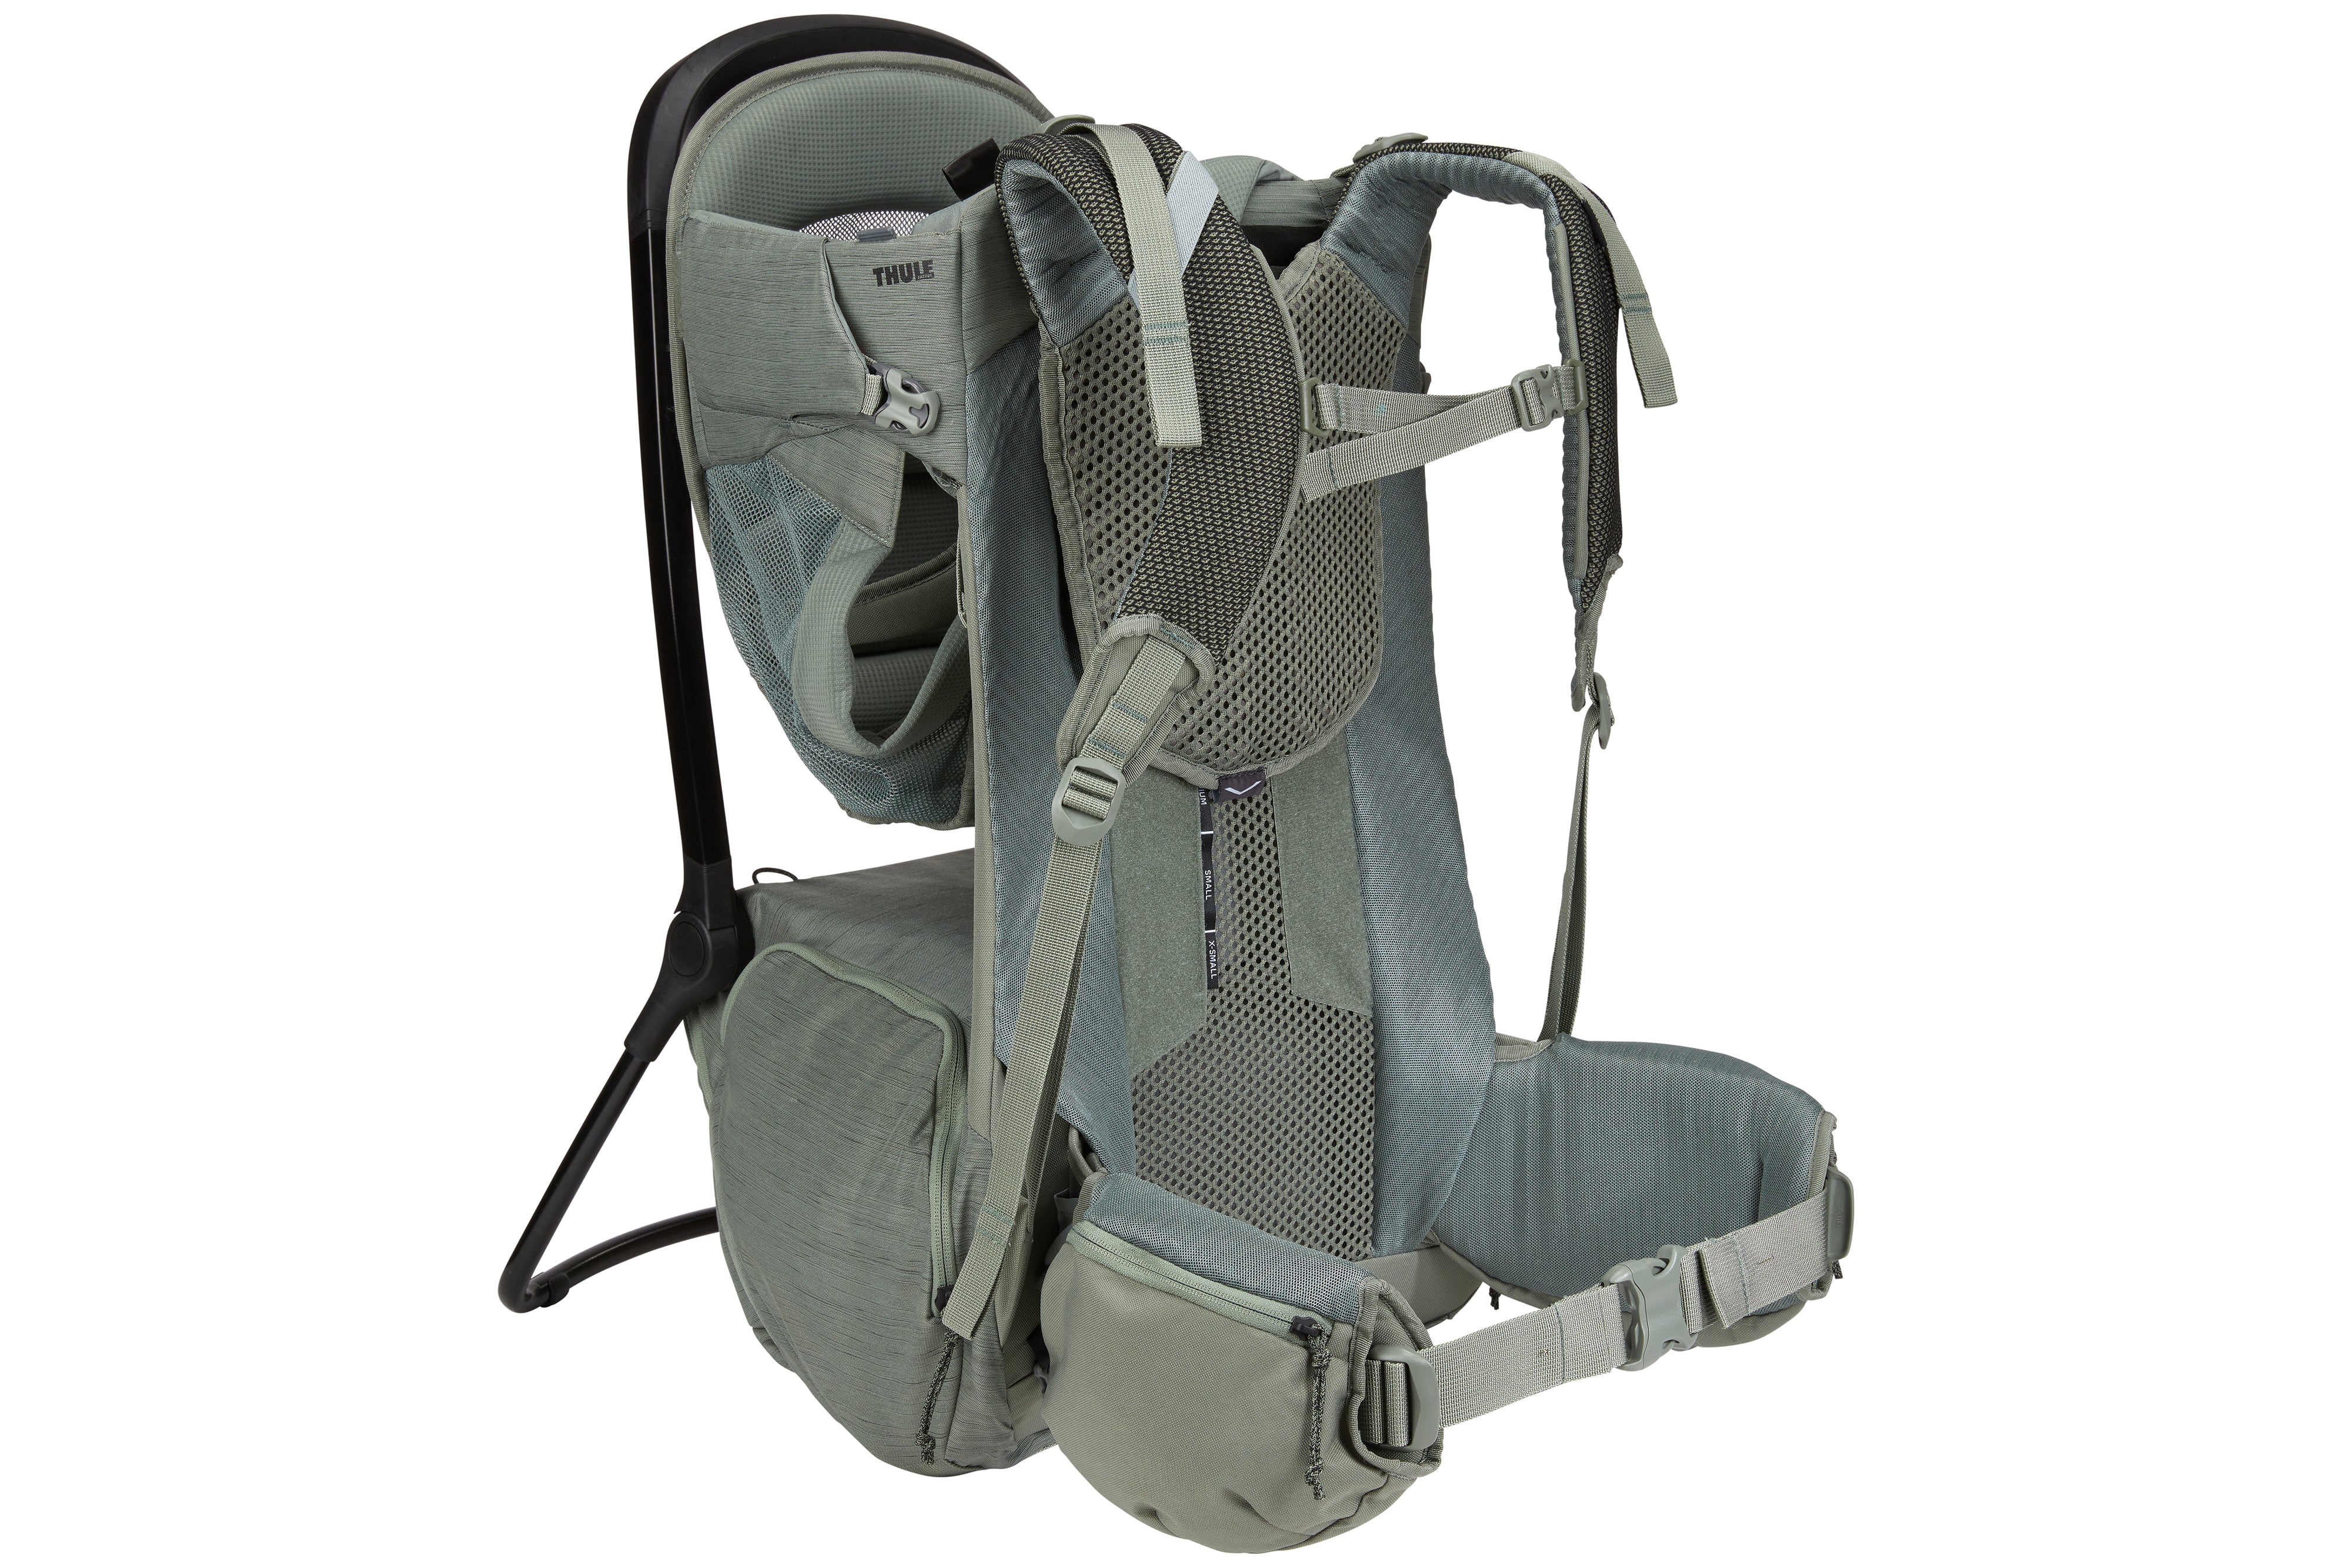 Thule Child Carrier Backpack Sapling Agave Green